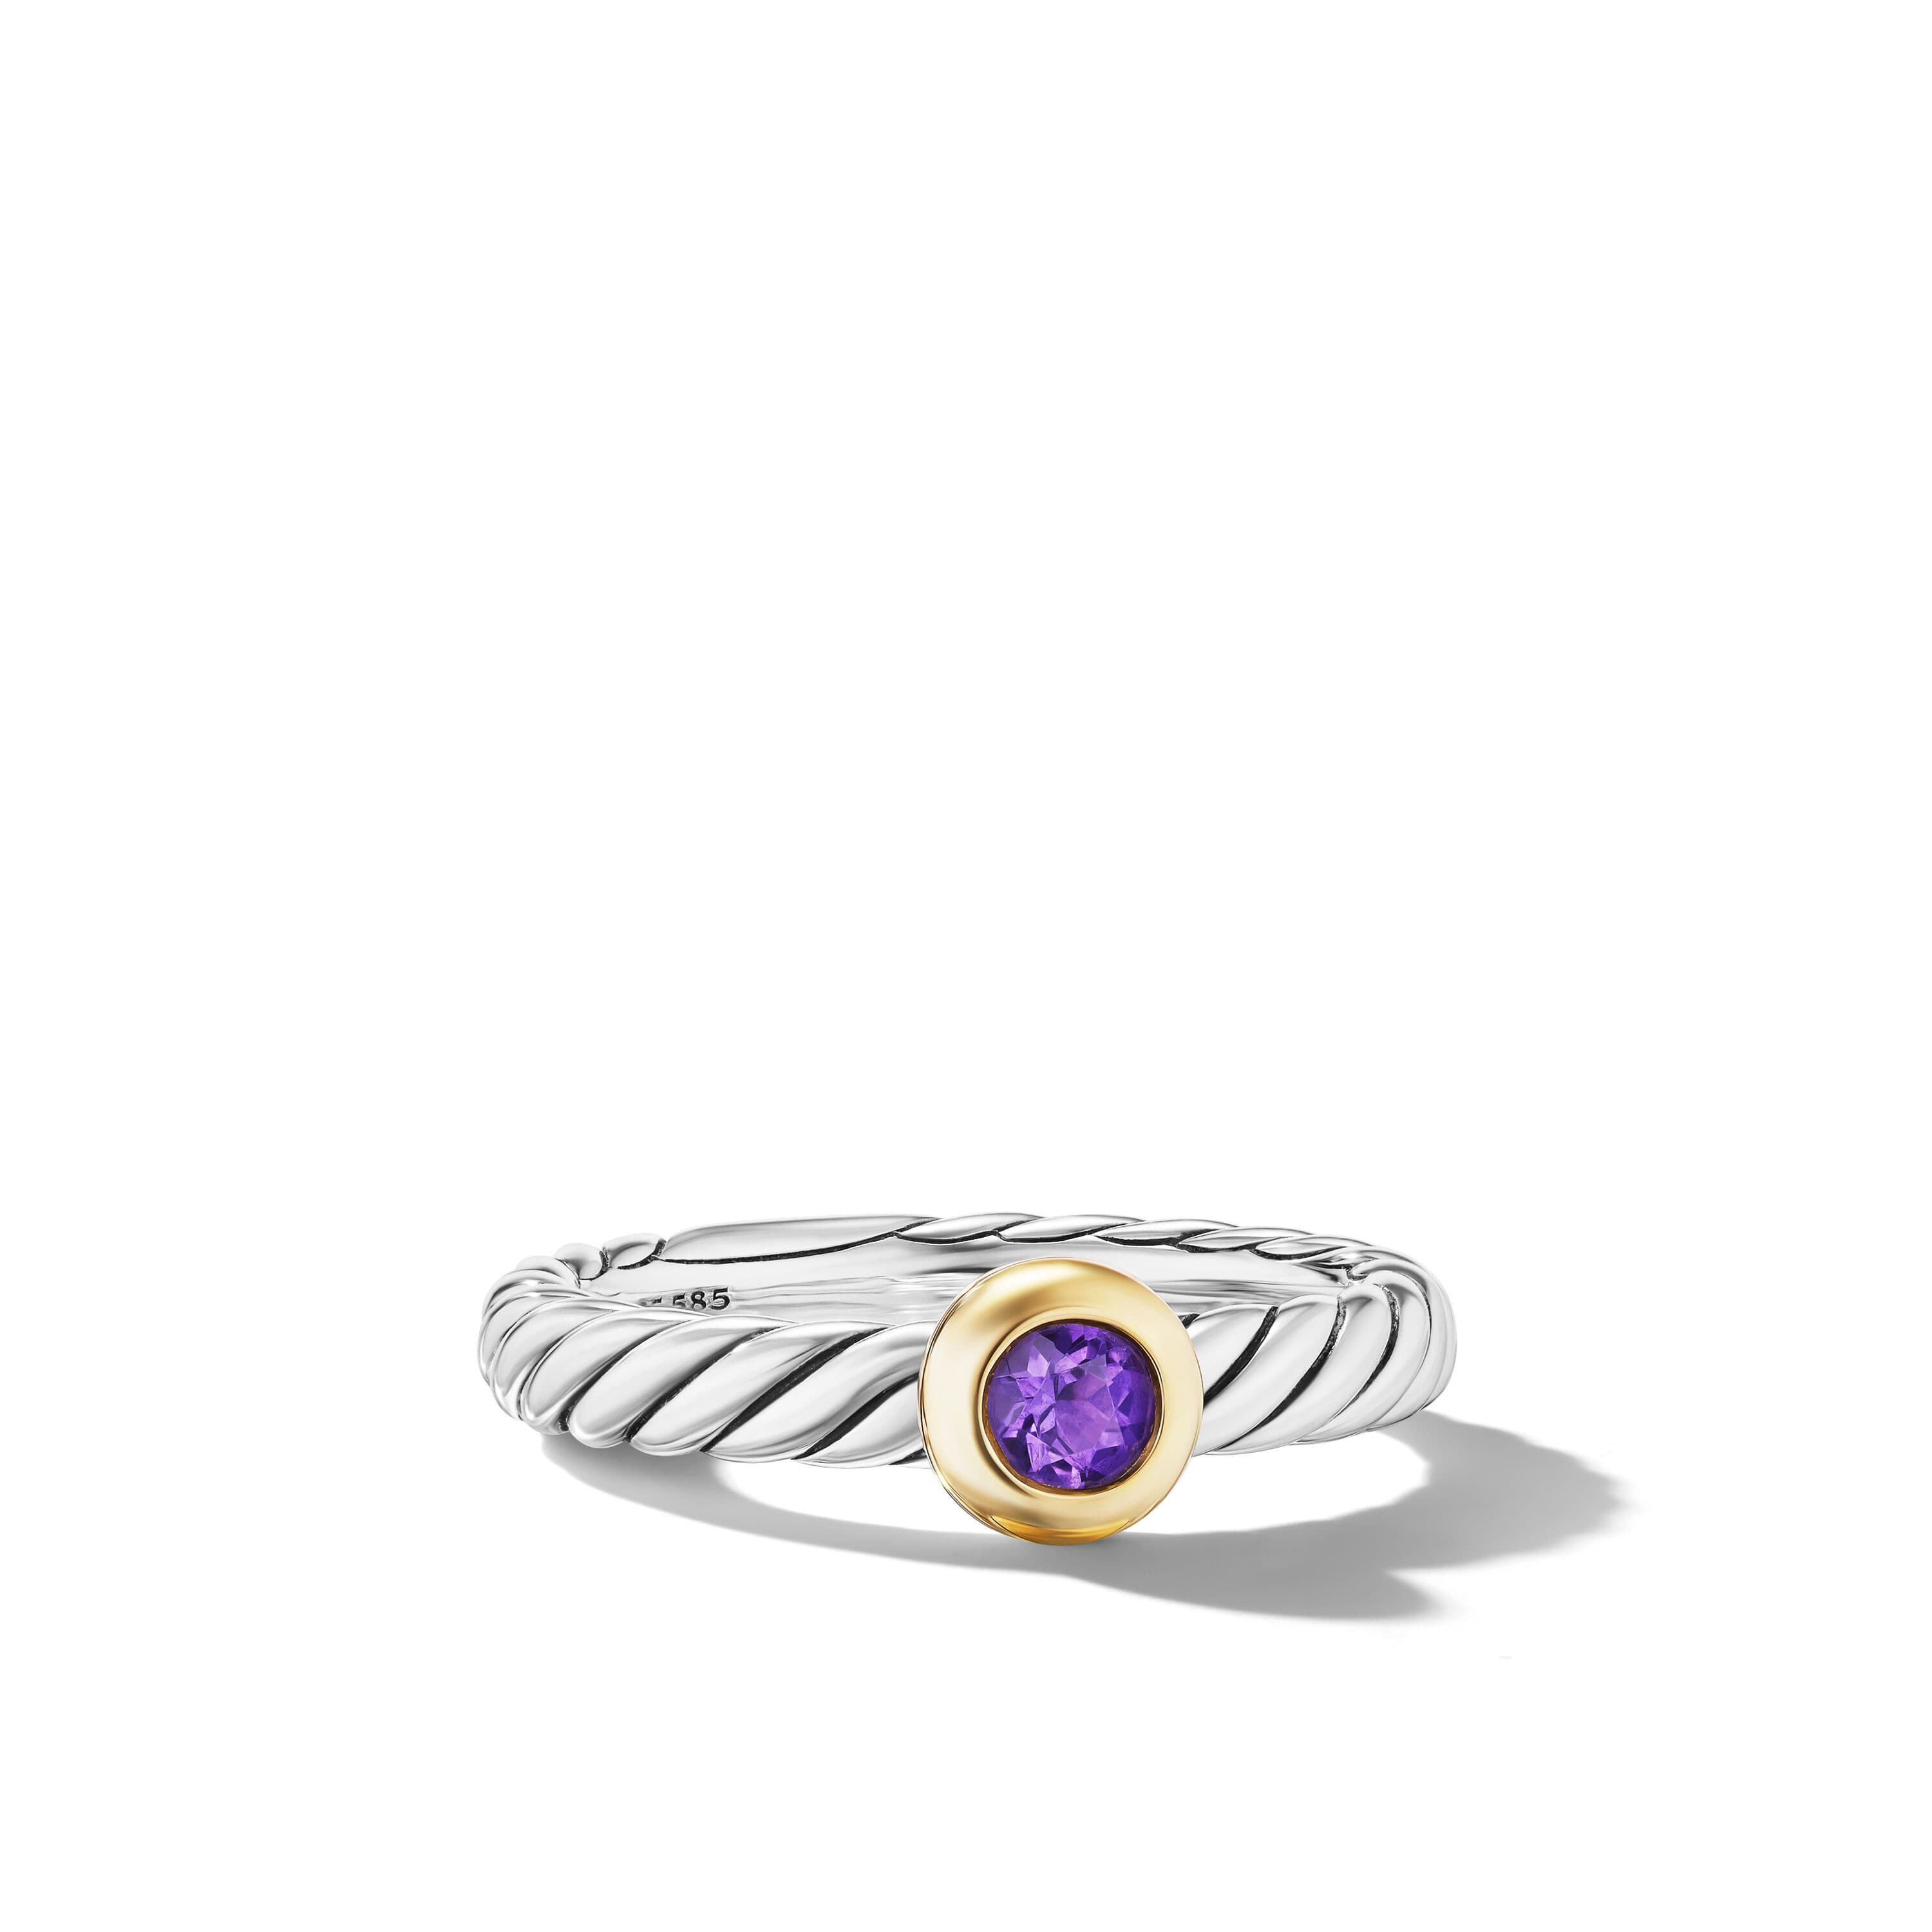 David Yurman Petite Cable Ring in Sterling Silver with 14K Yellow Gold and Amethyst, Size 7